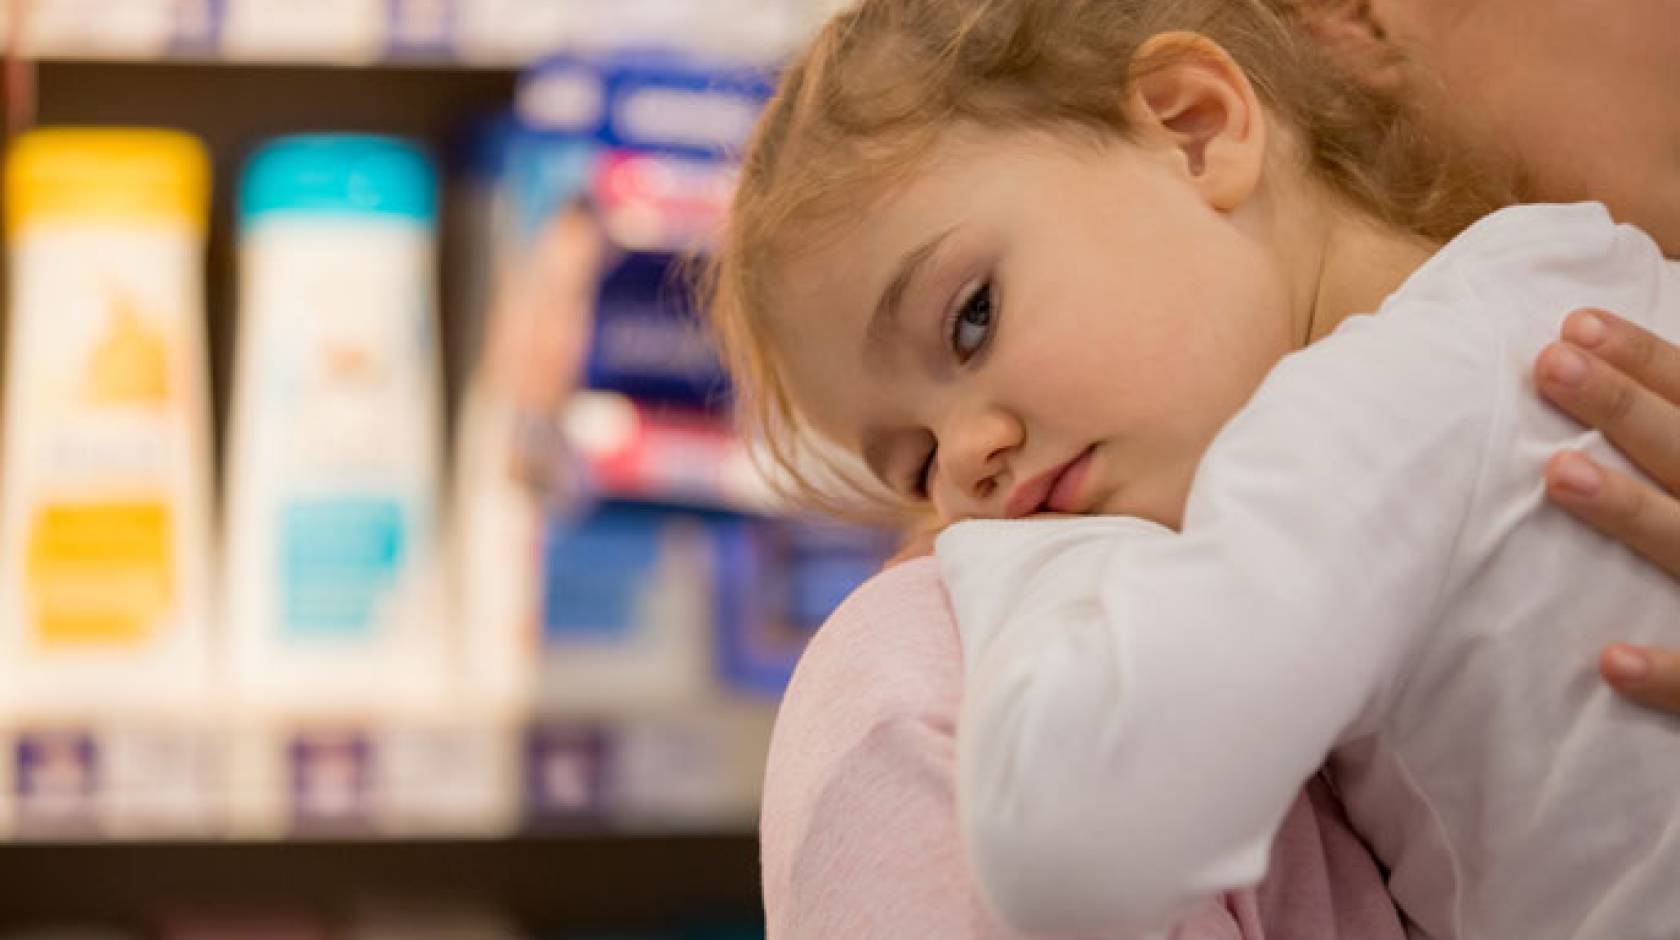 Child on parent's shoulder in front of personal care products